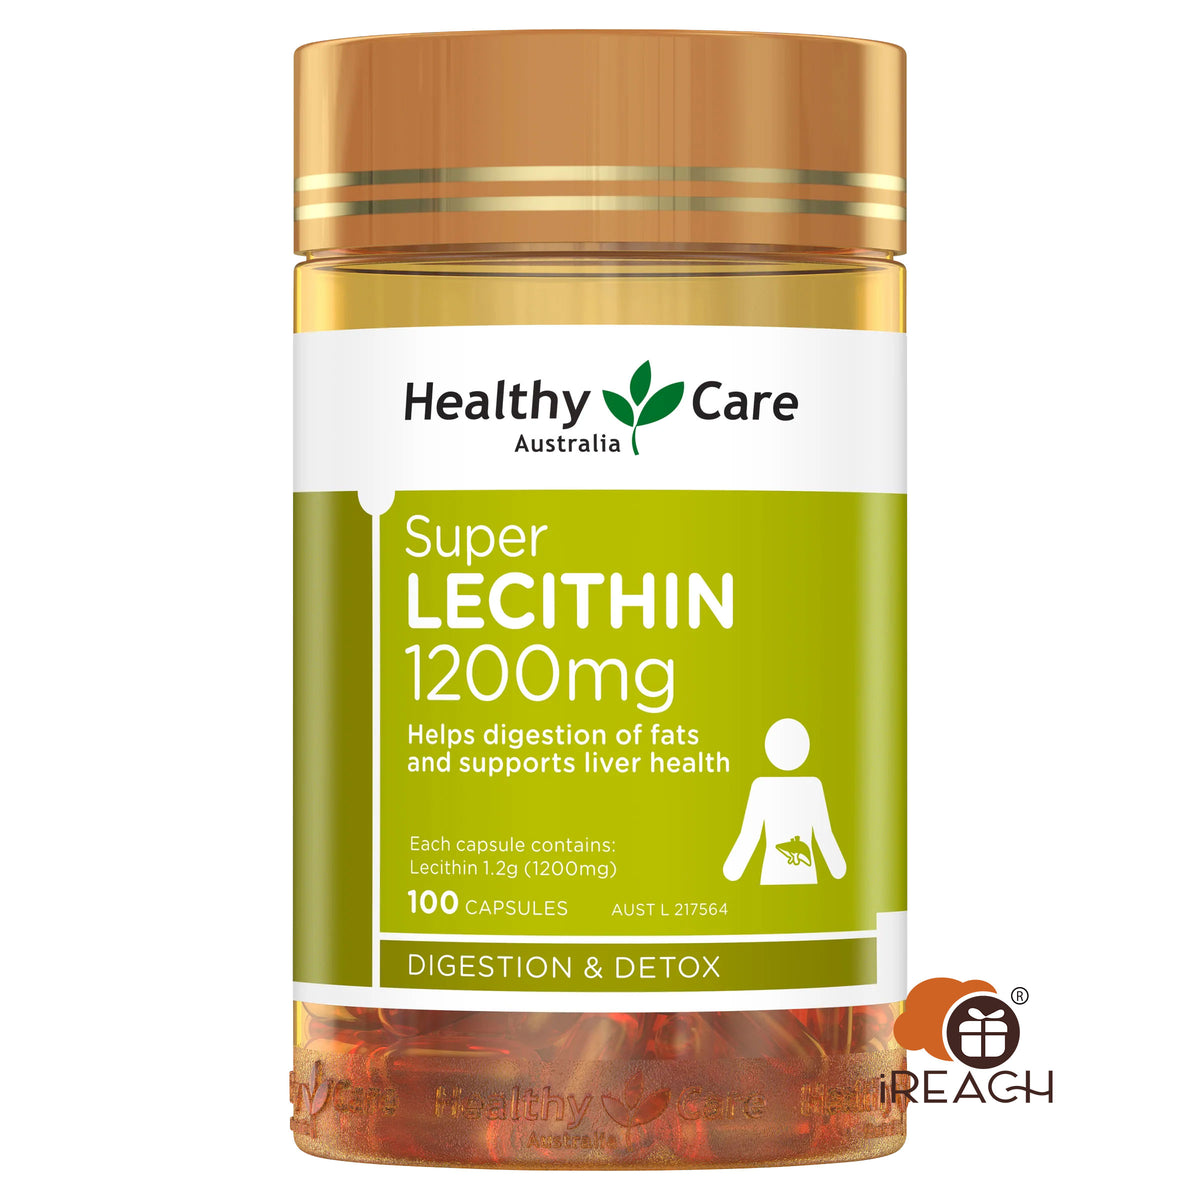 Healthy Care Super Lecithin 1200mg 100Capsules